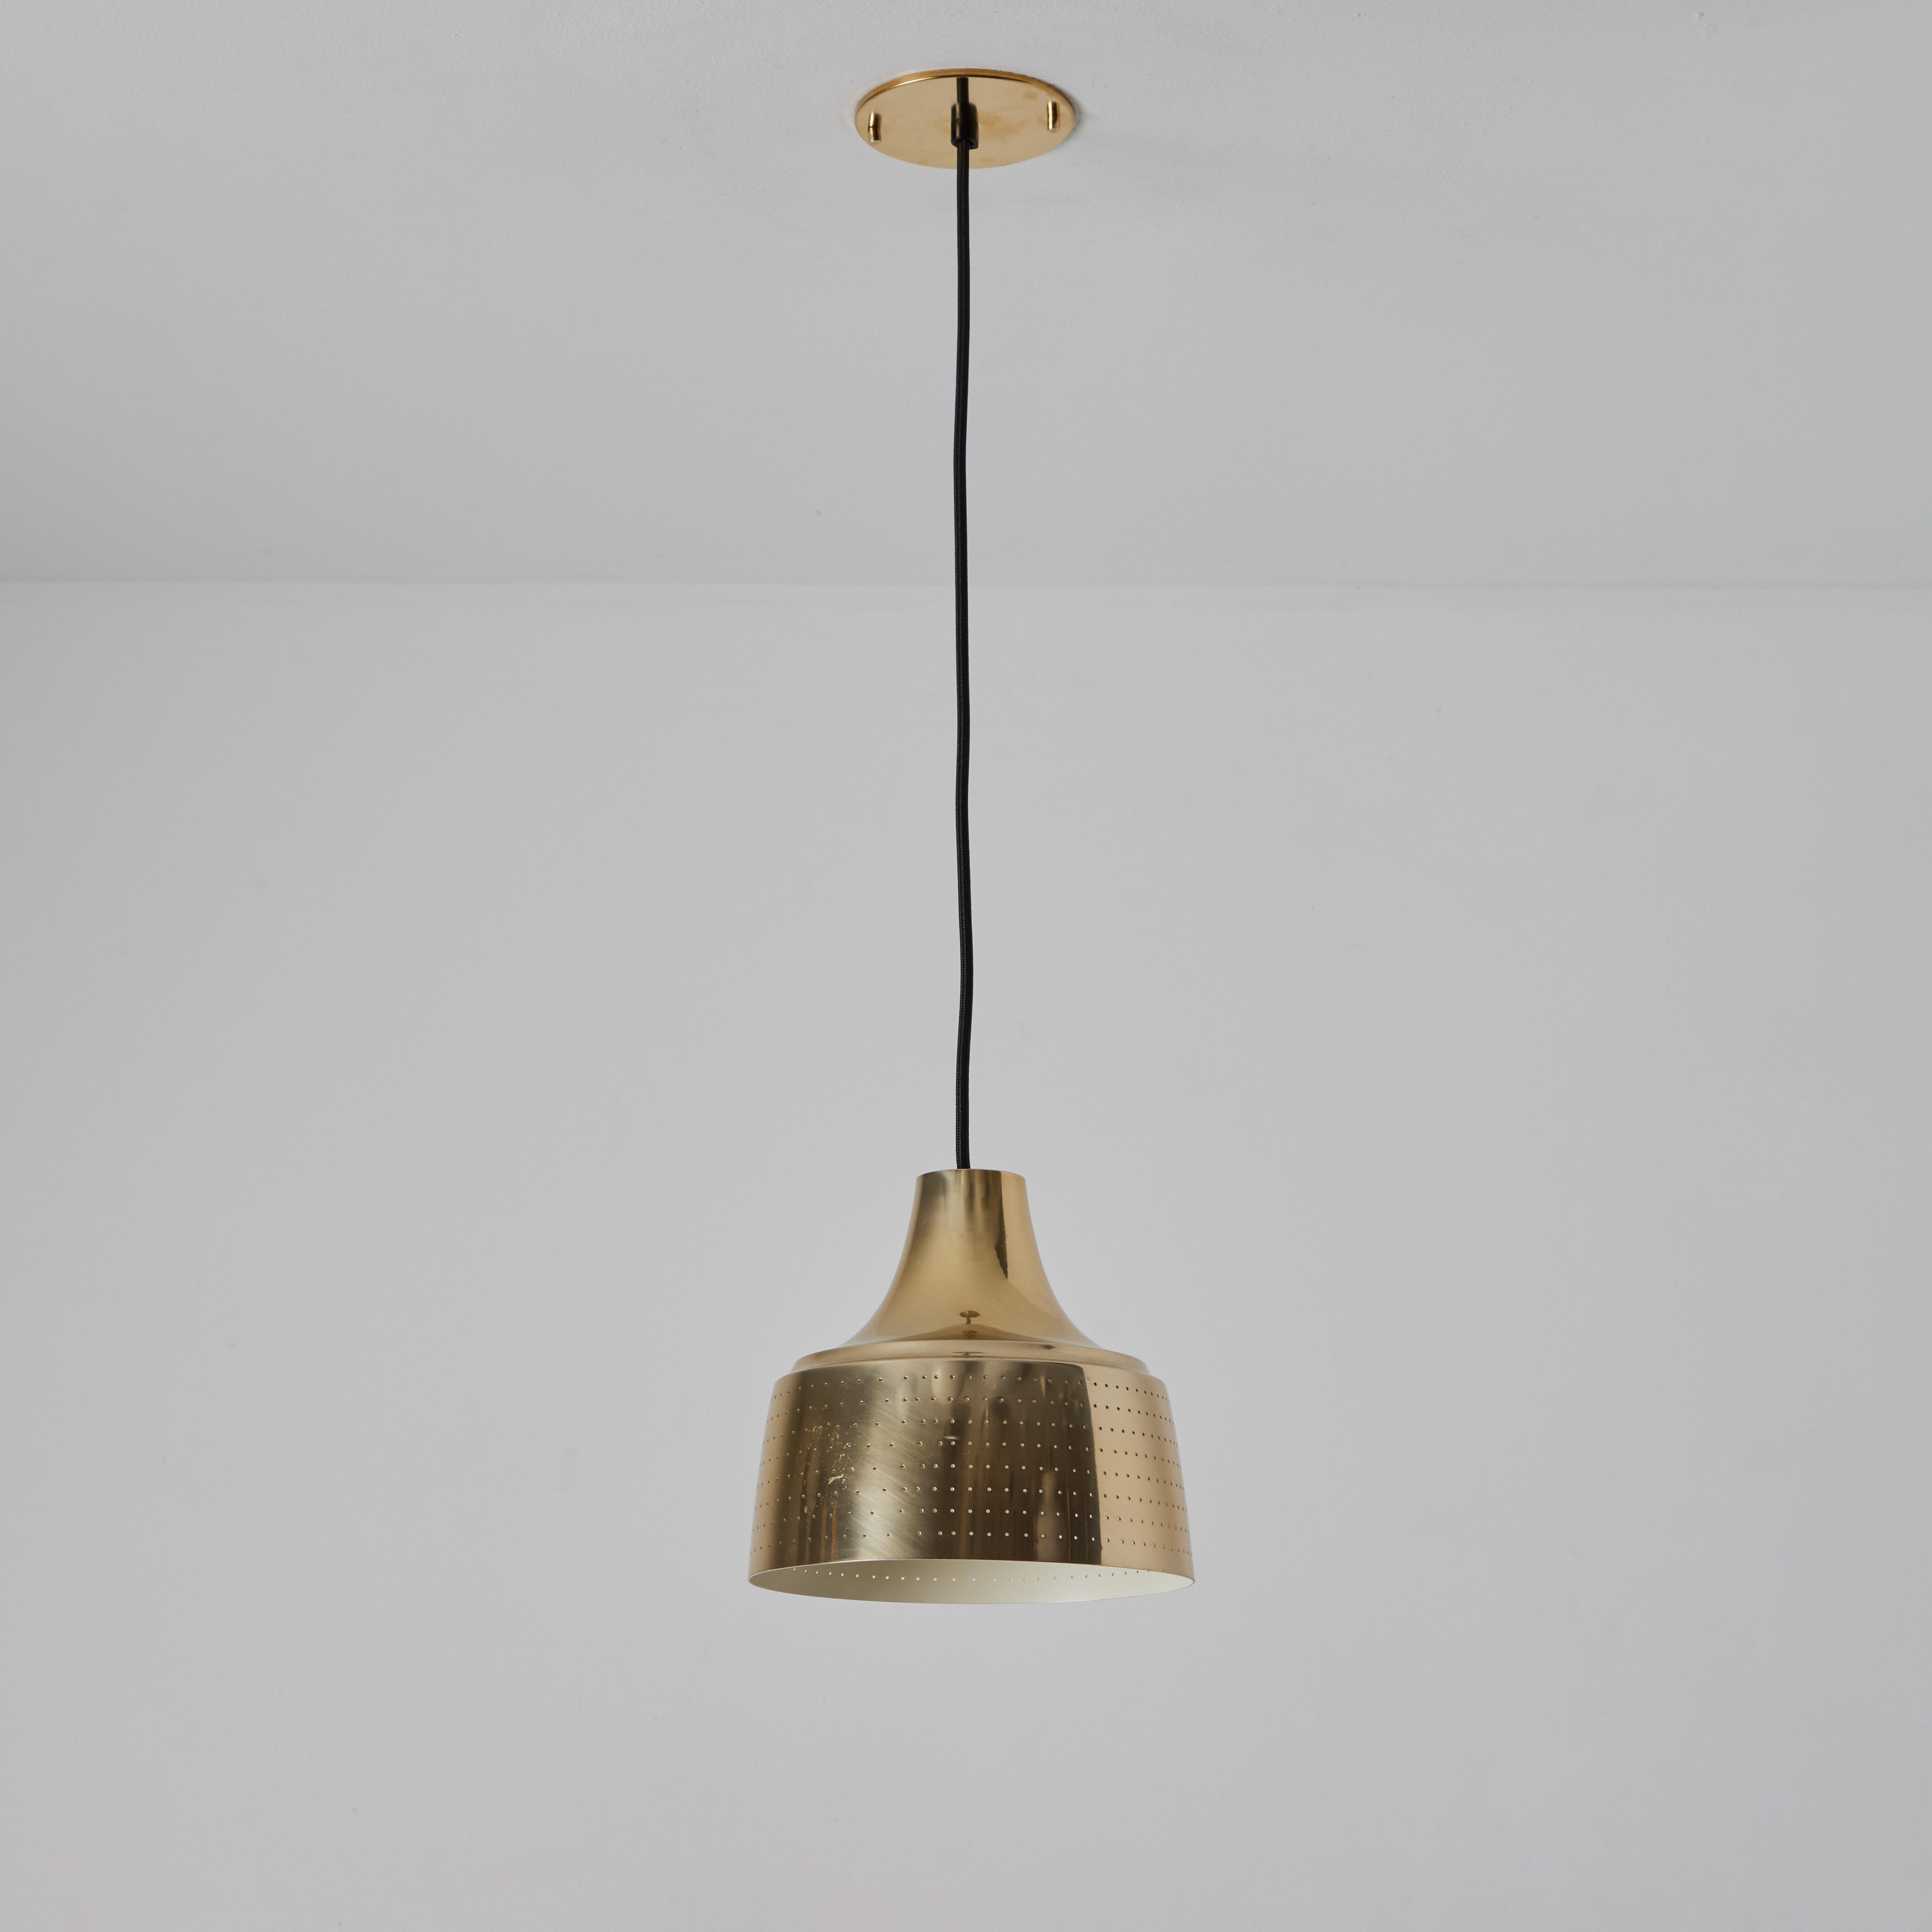 Scandinavian Modern 1950s Finnish Perforated Brass Pendant In The Manner of Paavo Tynell For Sale